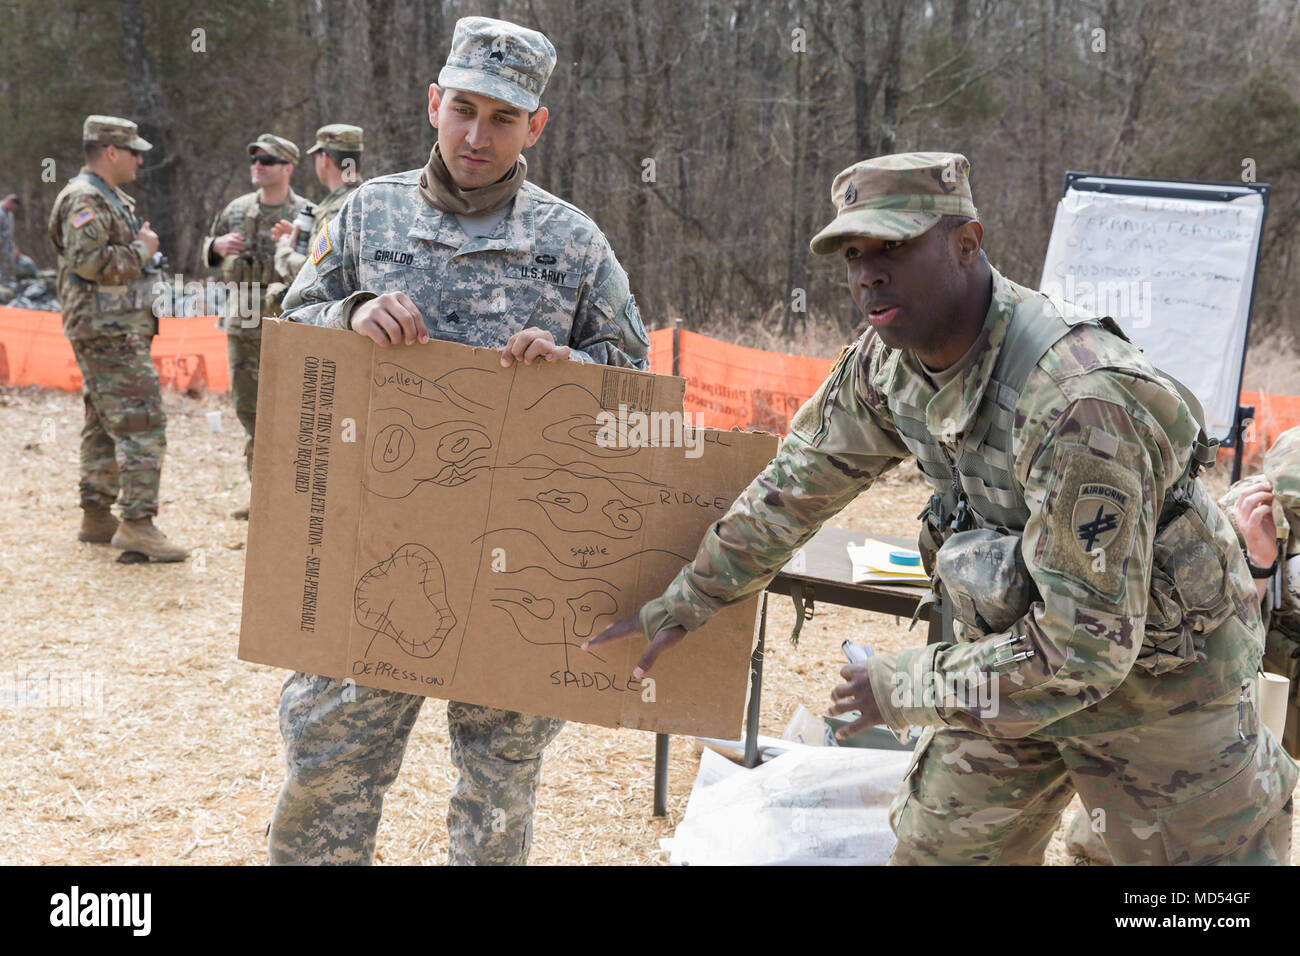 U.S. Army Reserve Staff Sgt. Levon T. Wilson, with the 437th Civil Affairs Battalion, 364th Civil Affairs Brigade, Ft. Story, Virginia, instructs a class on land navigation during the Combat Support Training Exercise (CSTX) at Fort Knox, Kentucky, March 18, 2018. CSTX 78-18-03 is a Combat Support Training Exercise that ensures America's Army Reserve units and Soldiers are trained and ready to deploy on short-notice and bring capable, combat-ready, and lethal firepower in support of the Army and our joint partners anywhere in the world. (U.S. Army photo by Spc. Jesse Coggins) Stock Photo